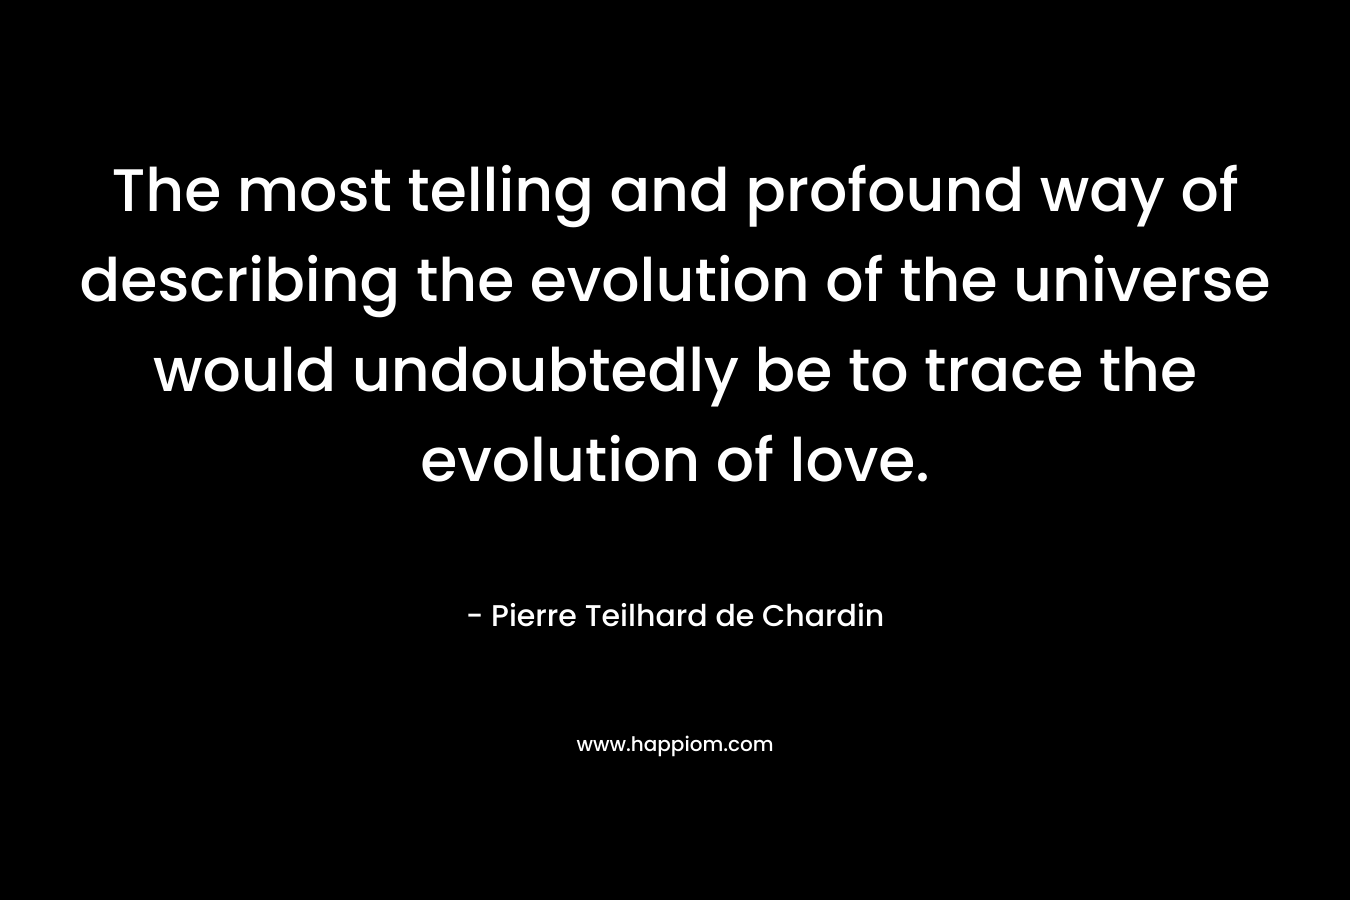 The most telling and profound way of describing the evolution of the universe would undoubtedly be to trace the evolution of love.